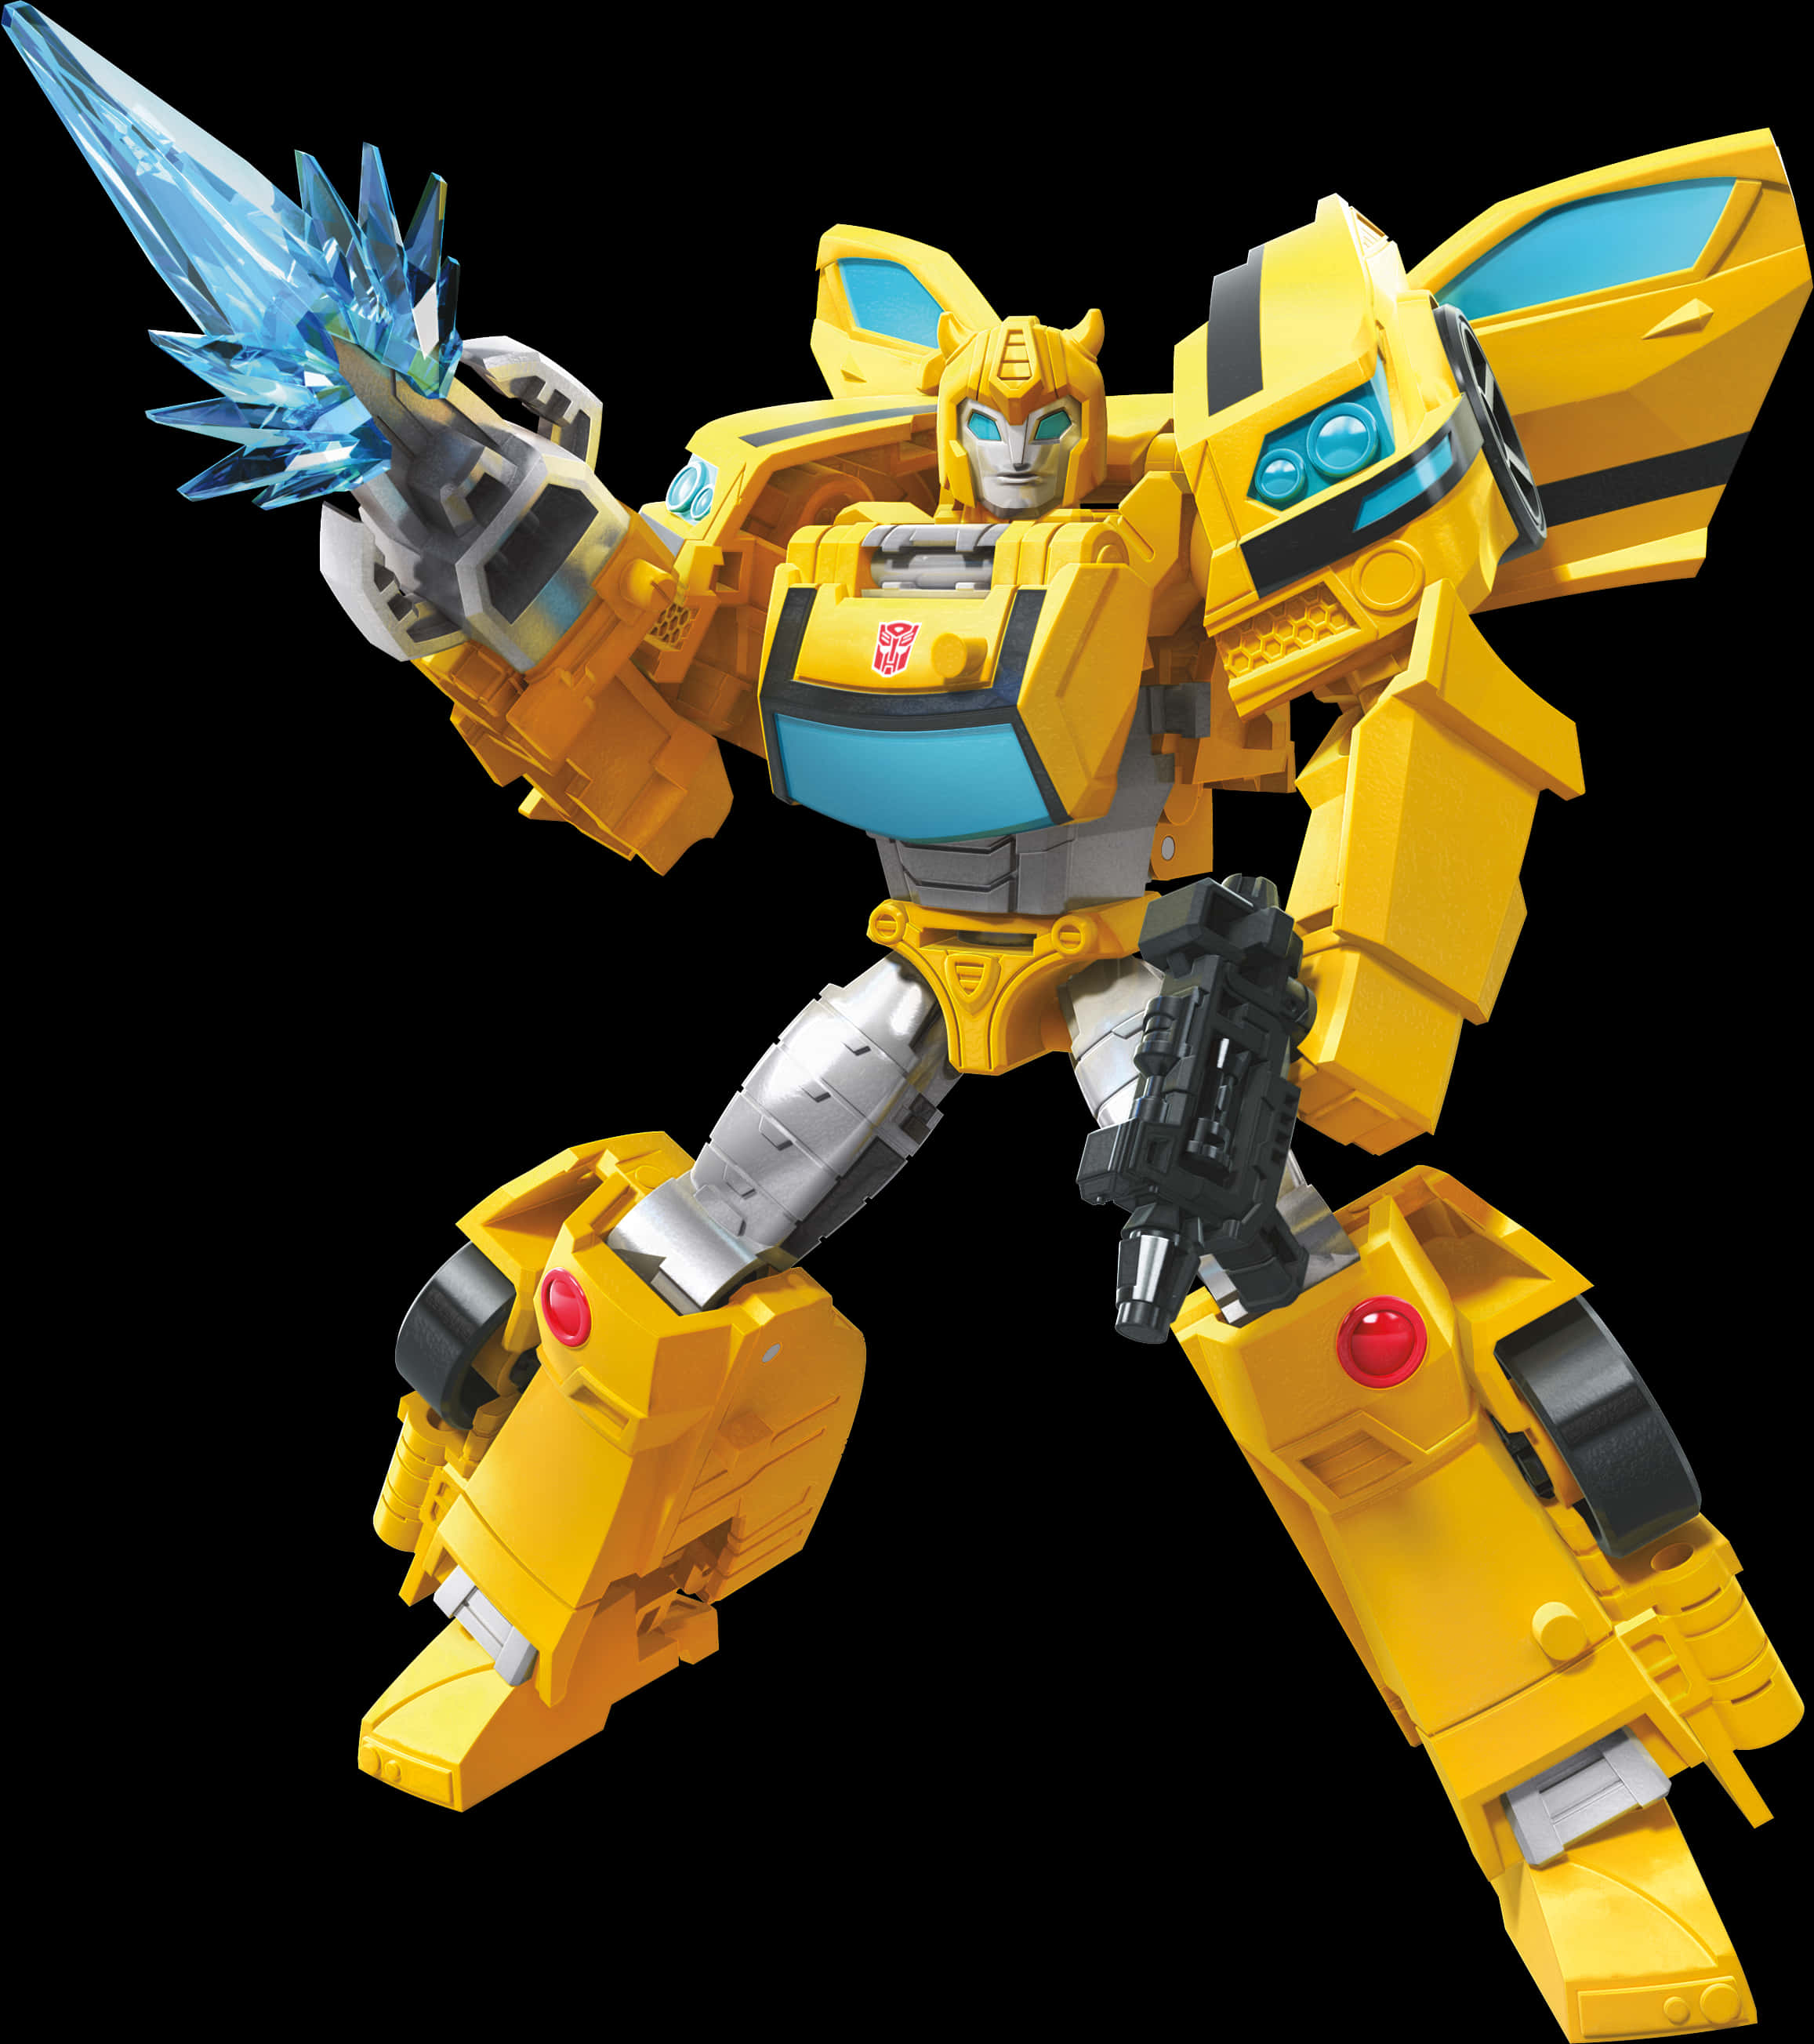 A Yellow Toy Robot With A Blue Object